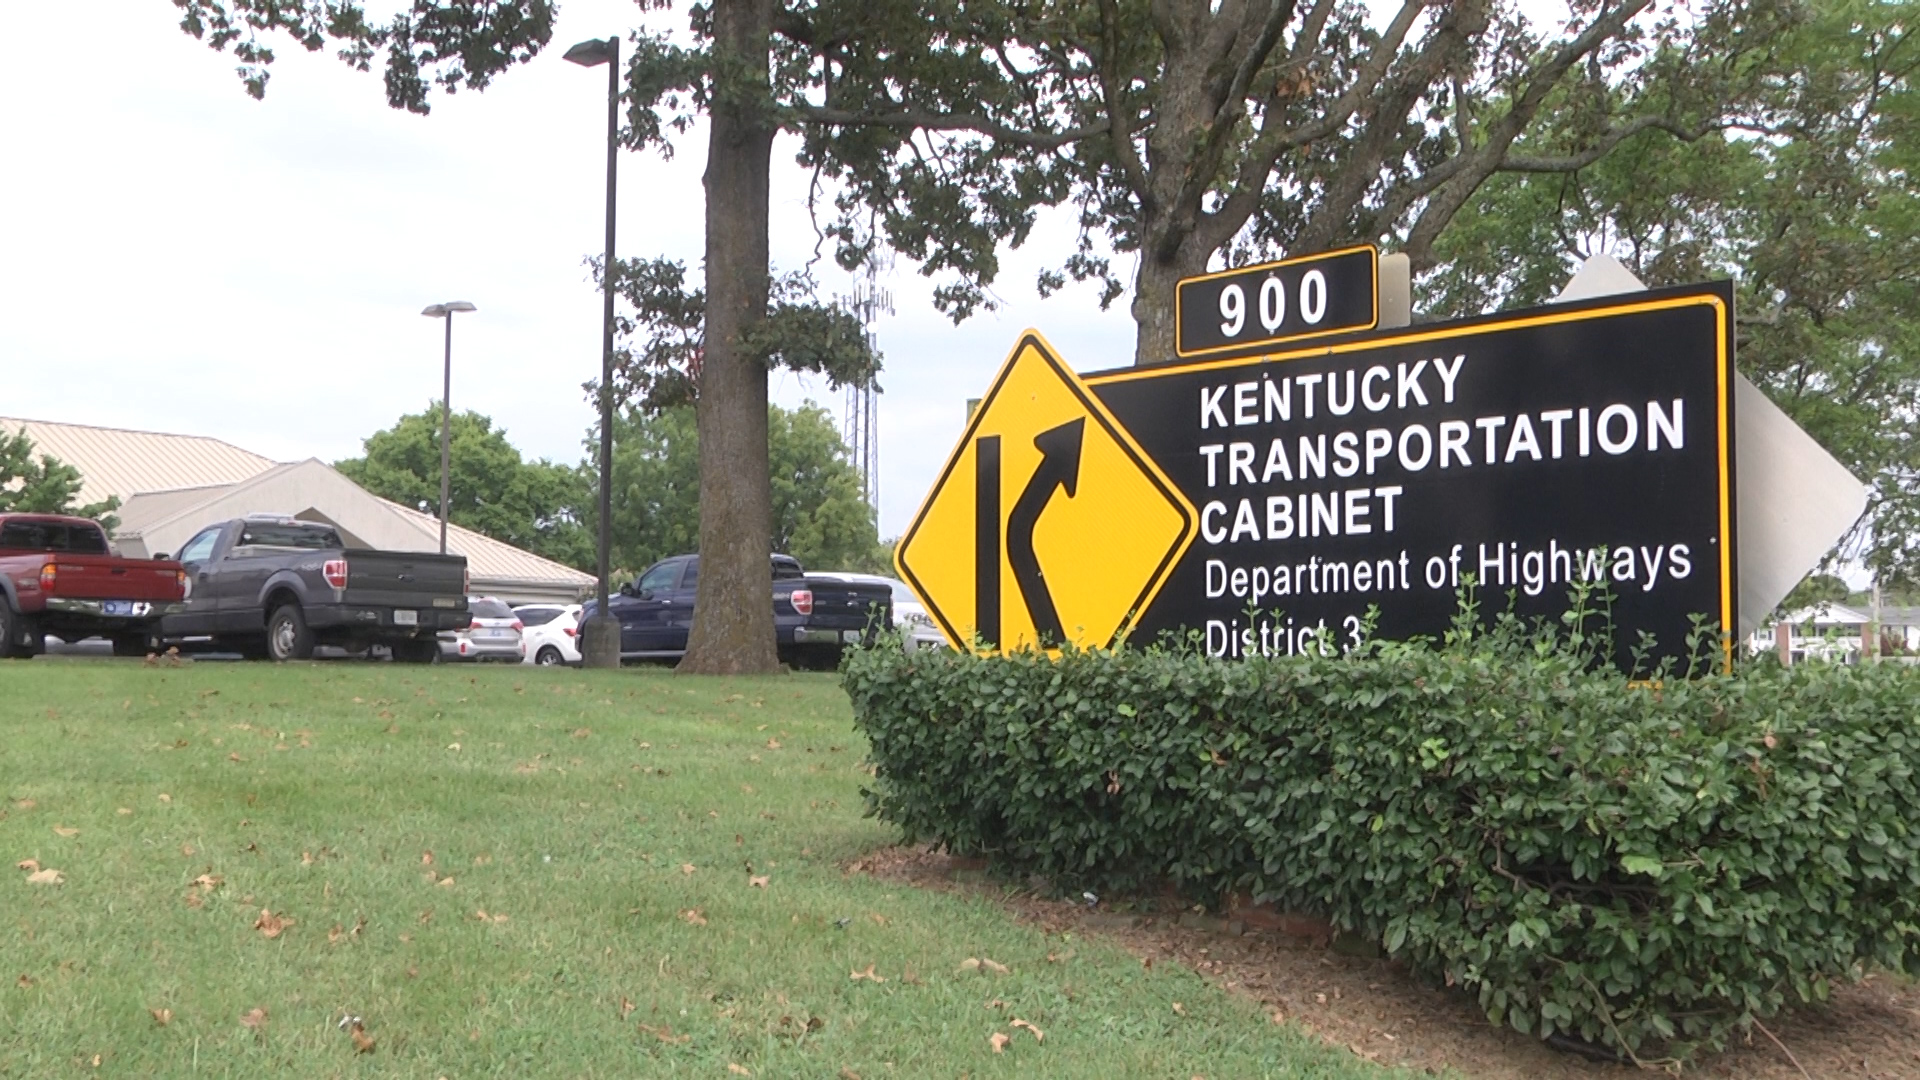 Ky Transportation Cabinet Urging Drivers To Use Caution After Road